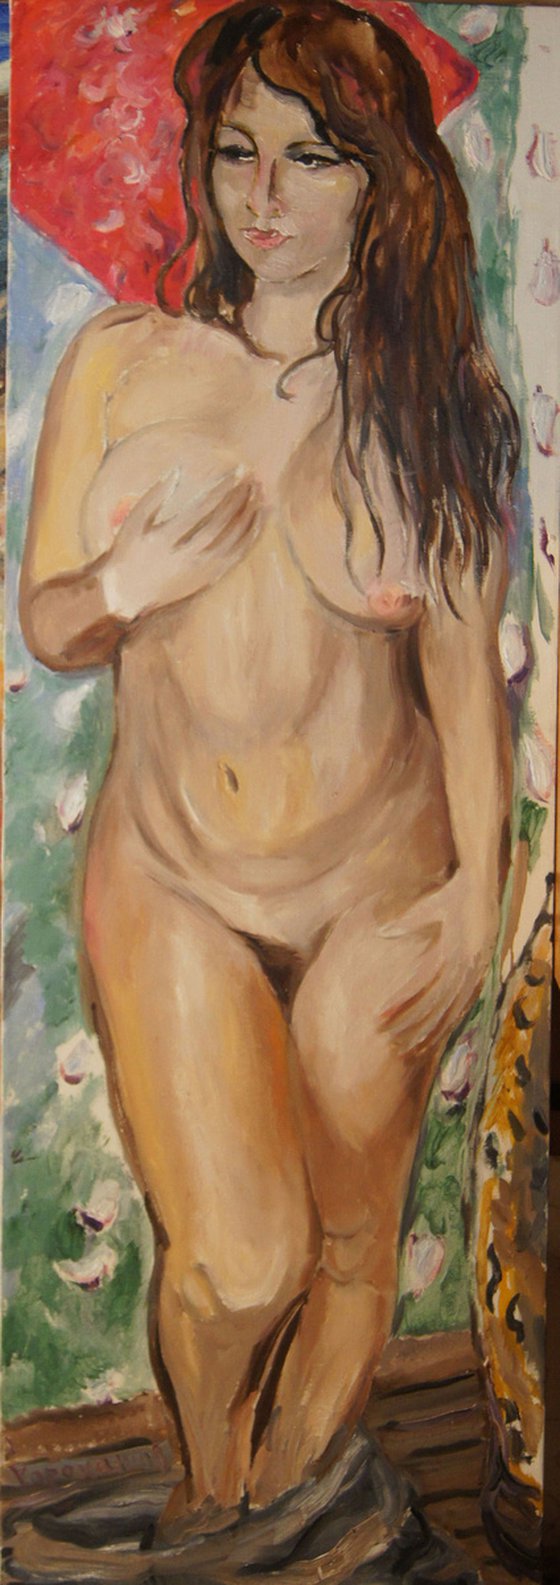 EVE - nude art, original painting, oil on canvas, large size 160x55